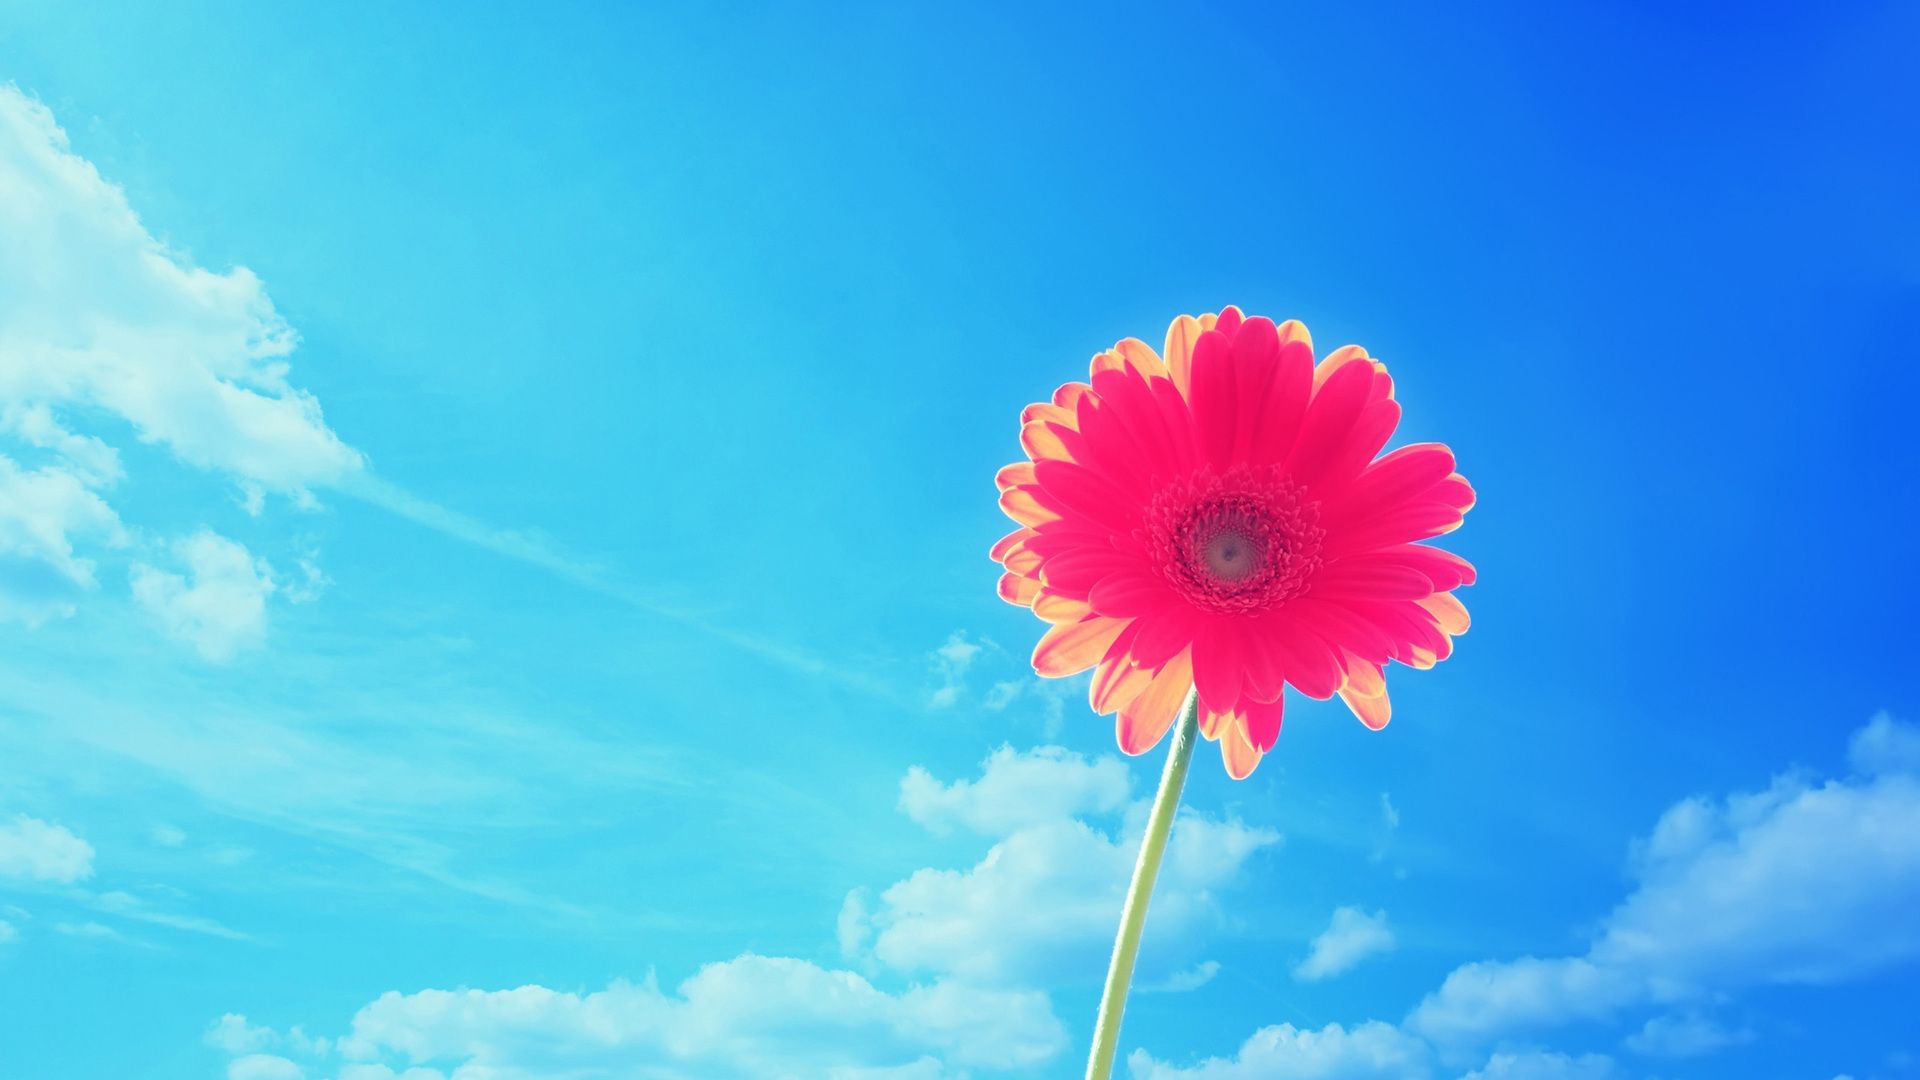 Find out: Flower In The Sky wallpaper on http://hdpicorner.com ...